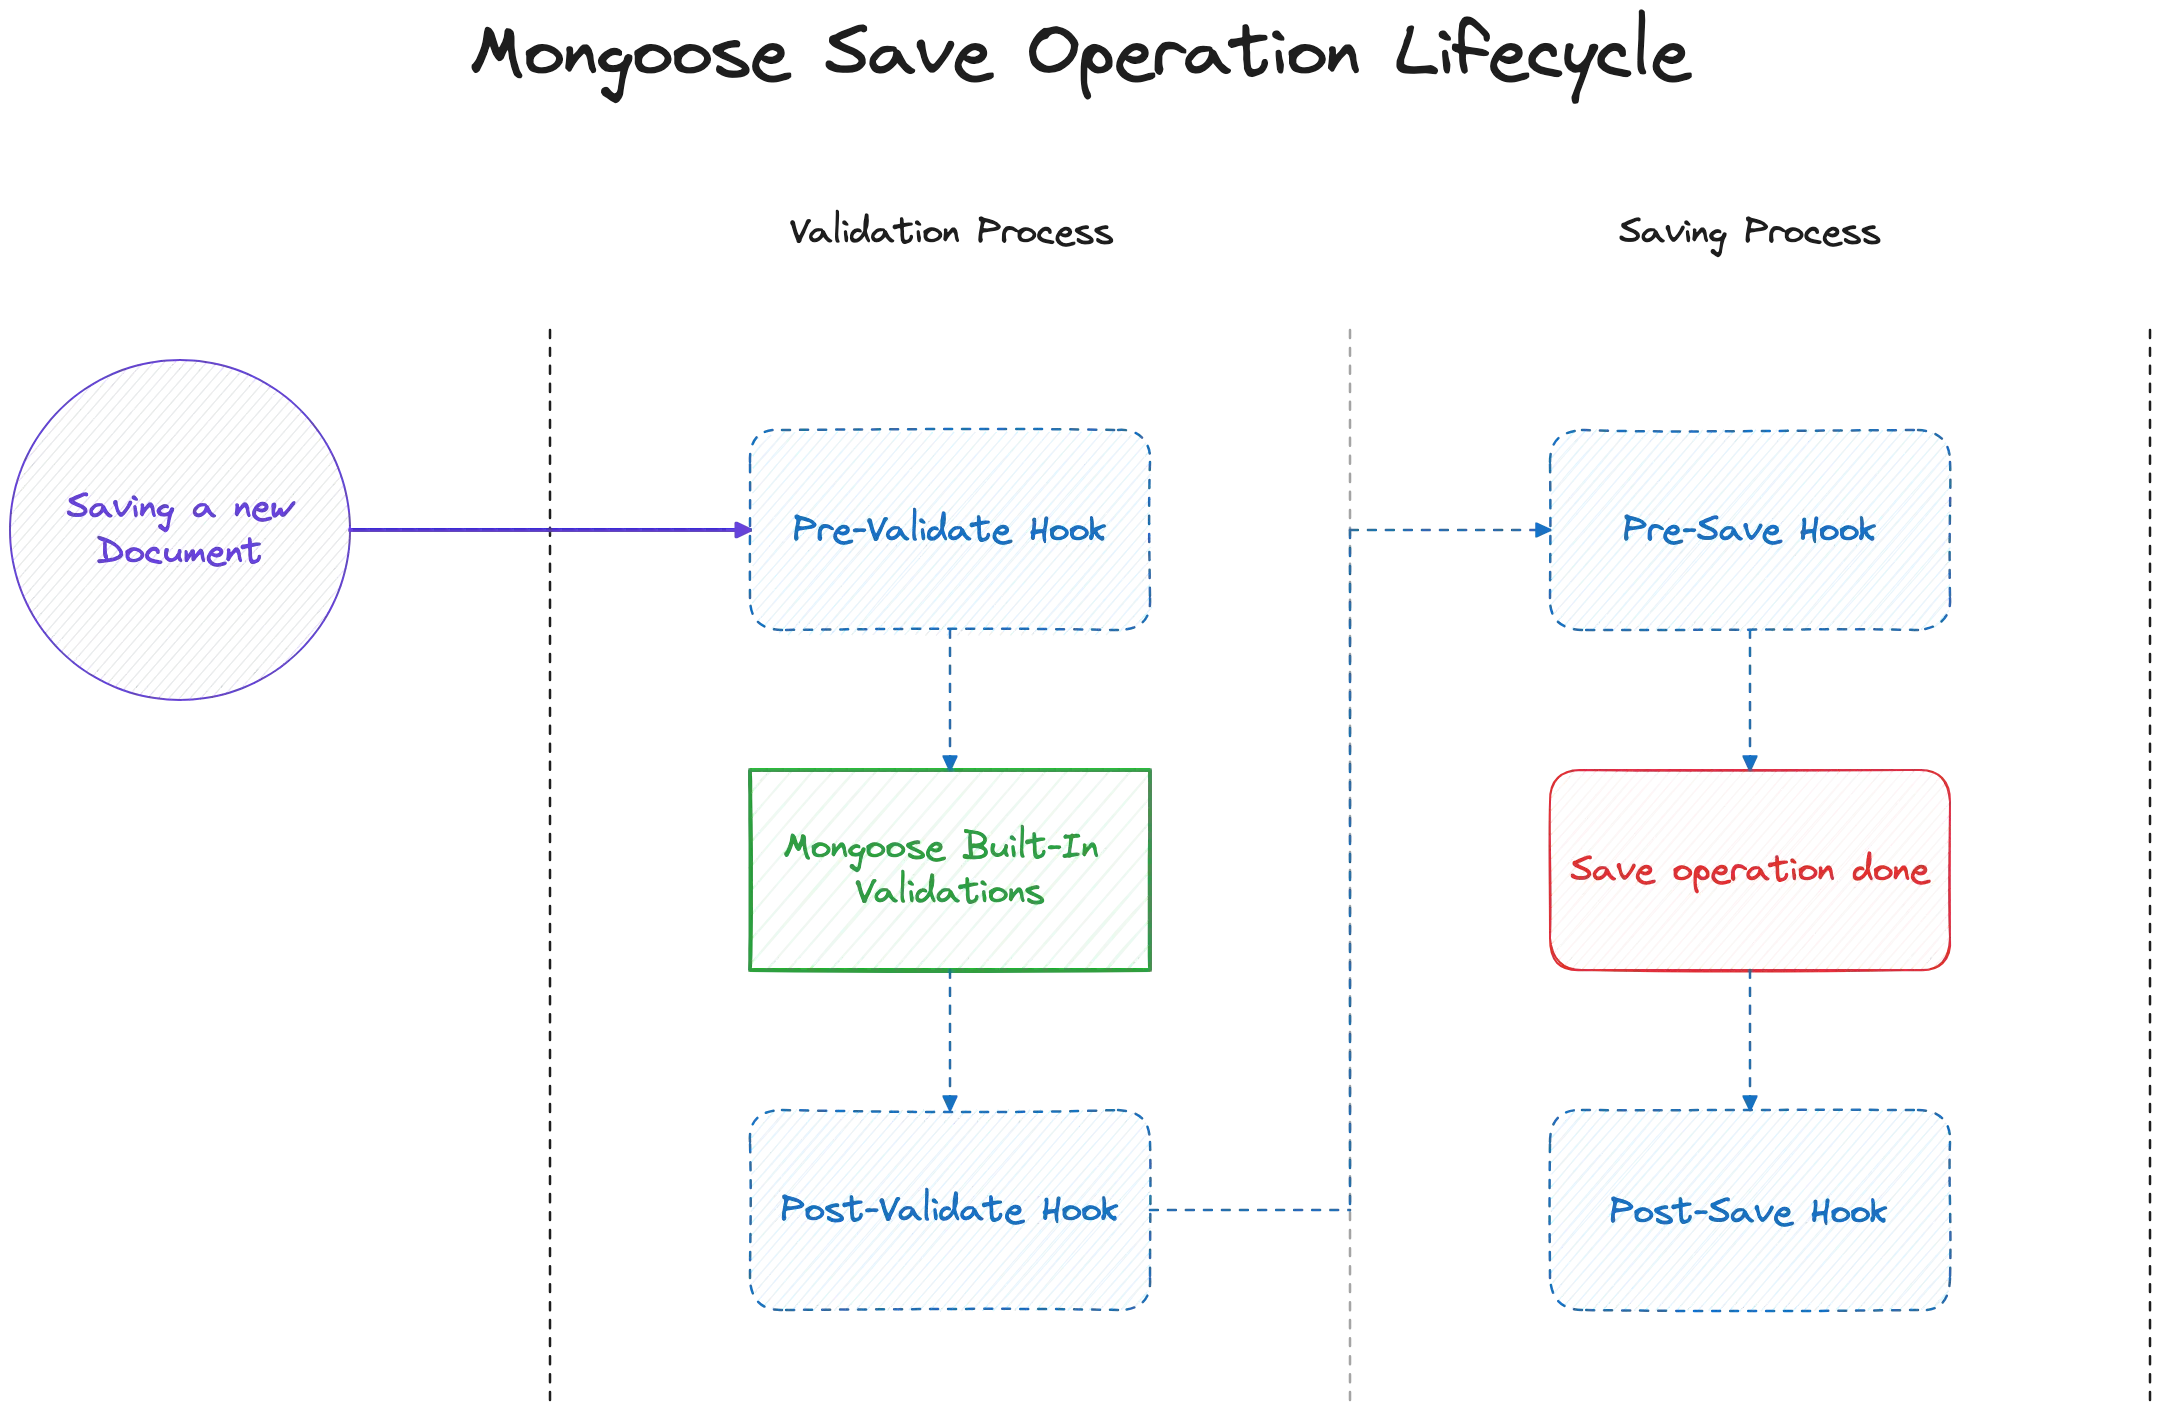 The Lyfecycle of Mongoose Save Operation